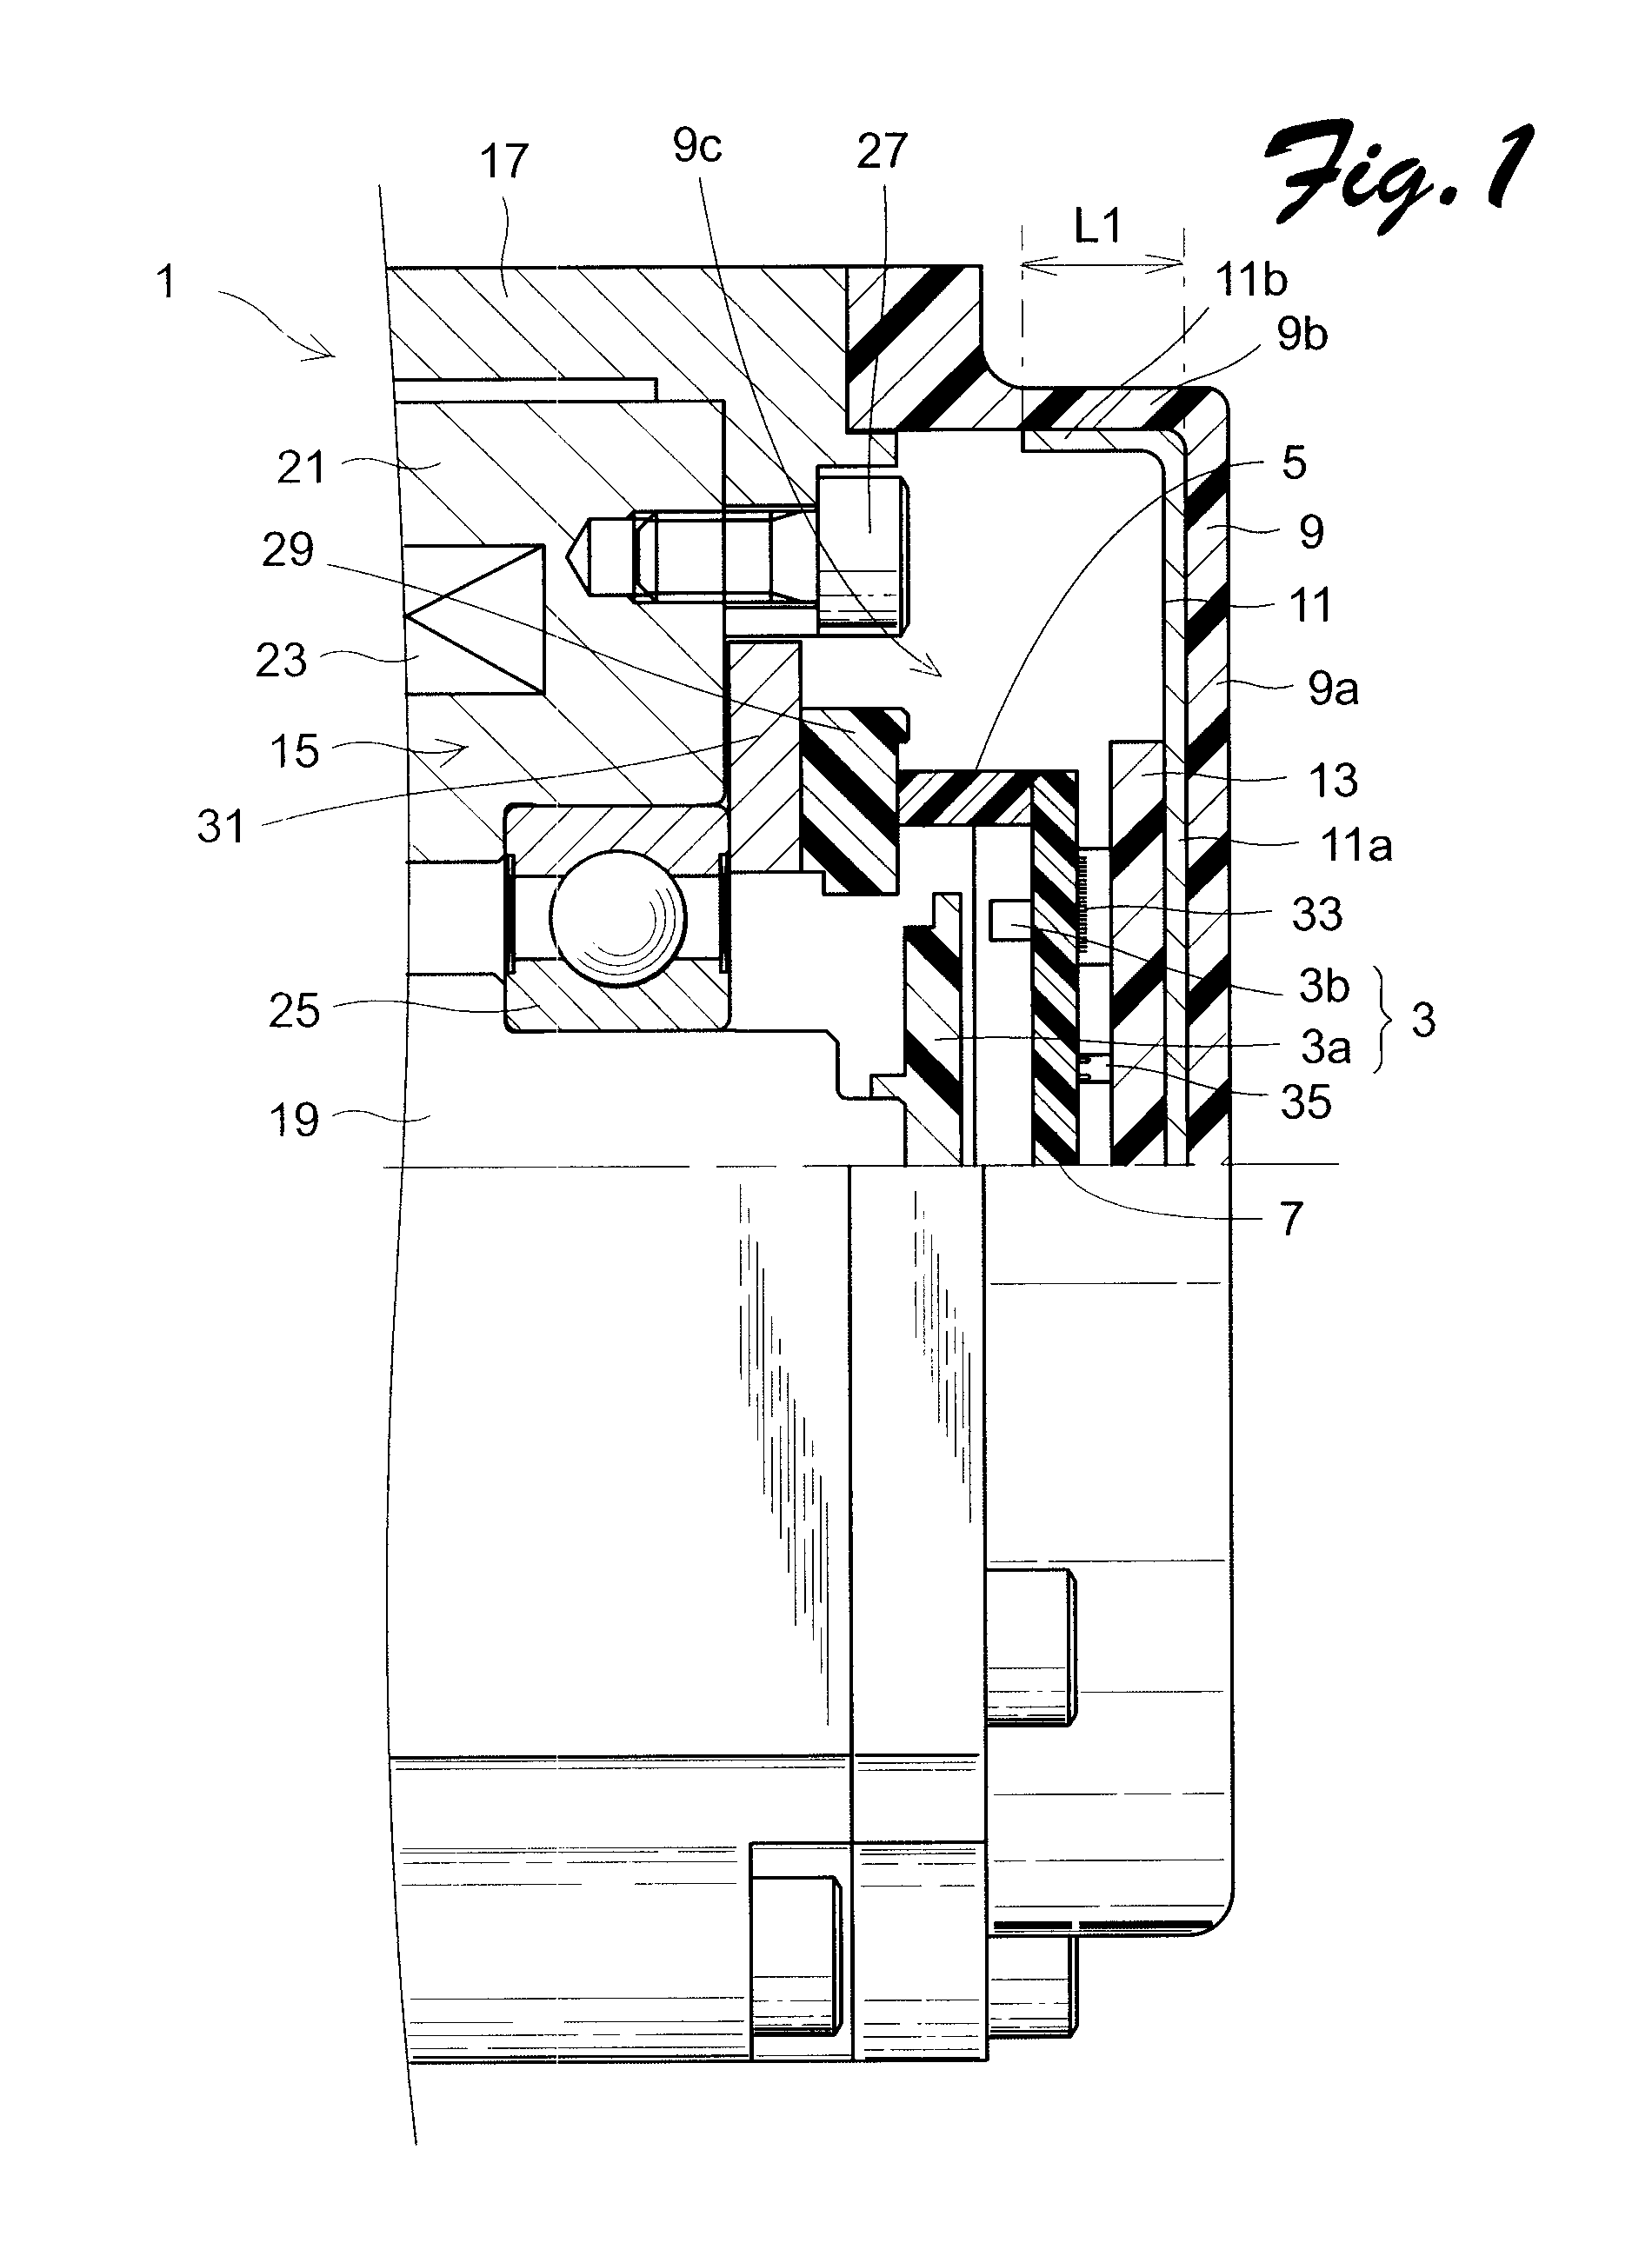 Heat radiation structure of electric apparatus